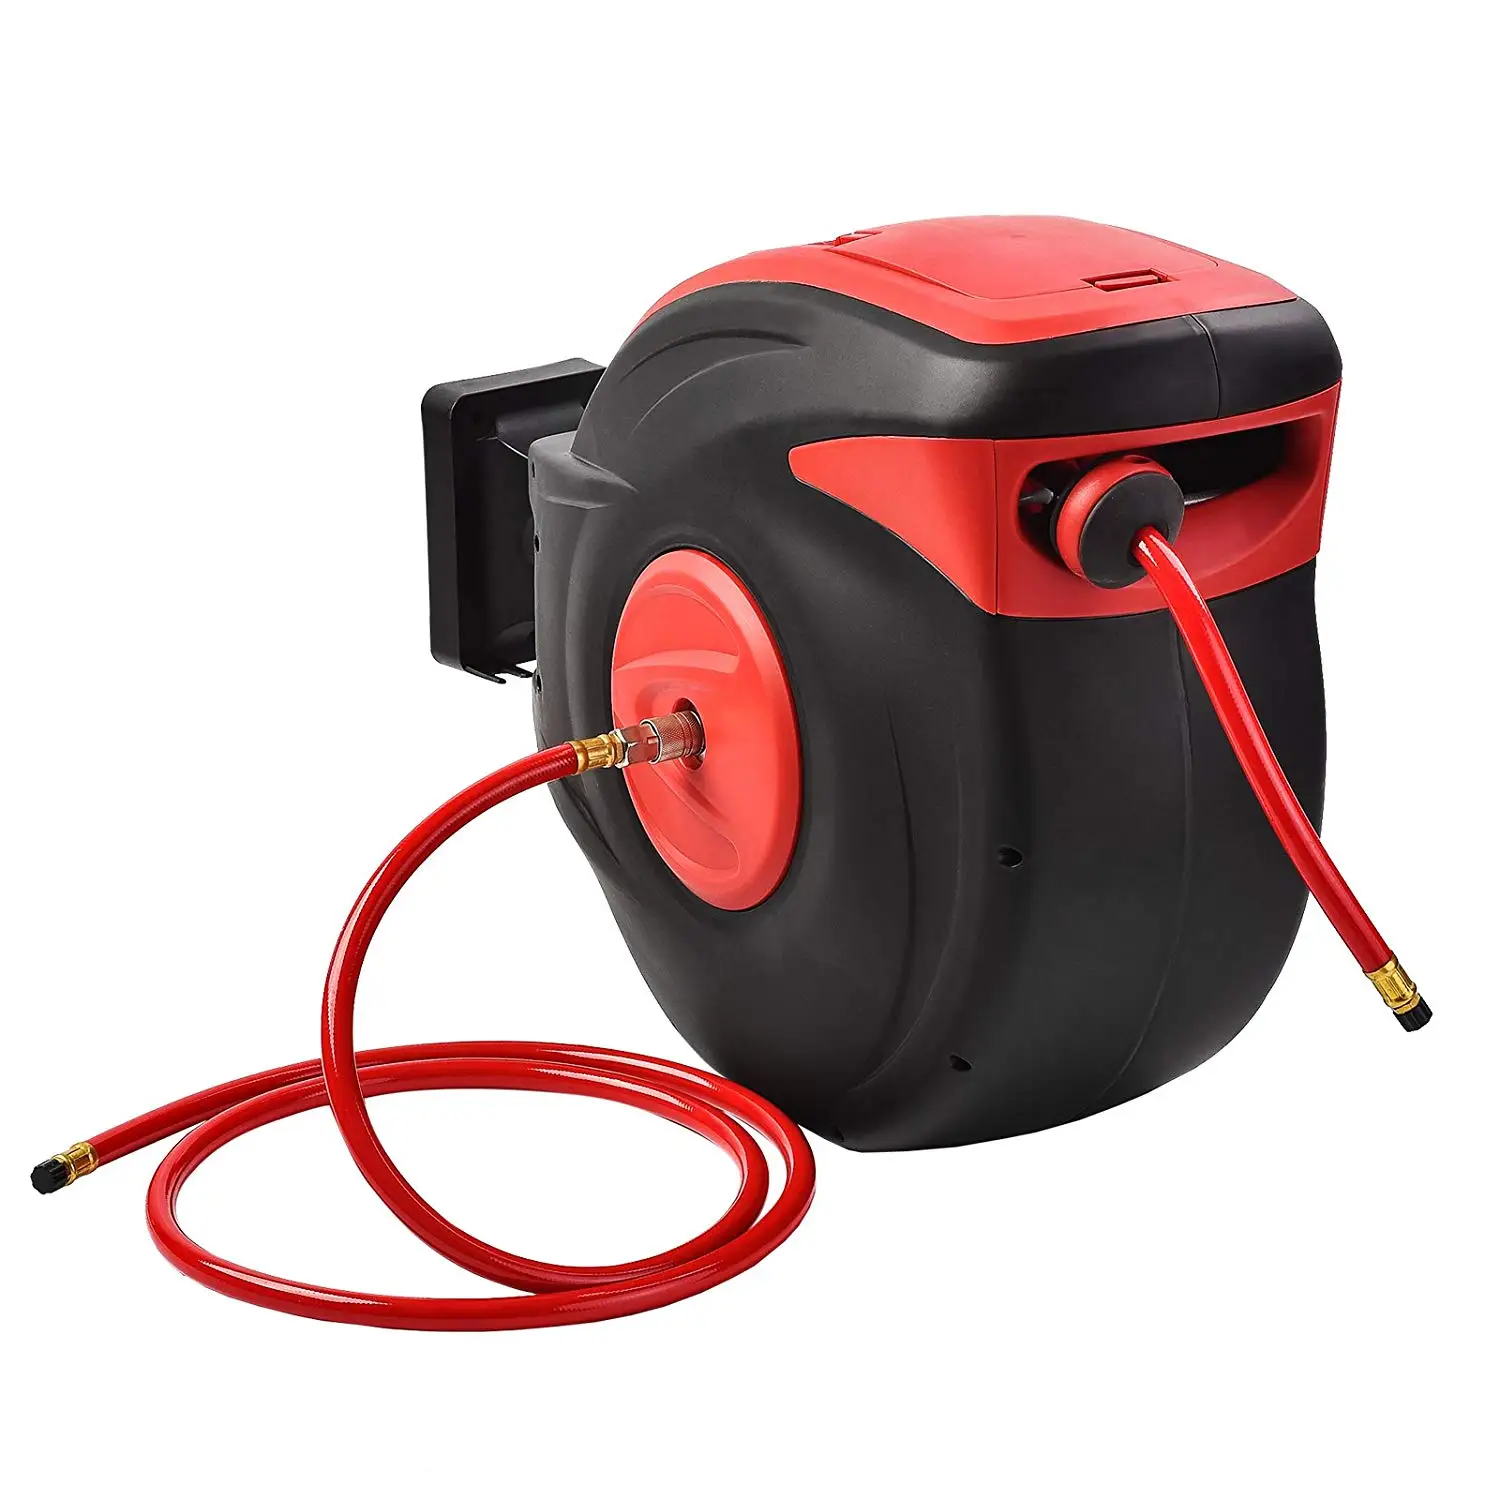 Toolsempire Air Hose Reel with 3/8 In x 50 Ft Hybrid Air Hose ...